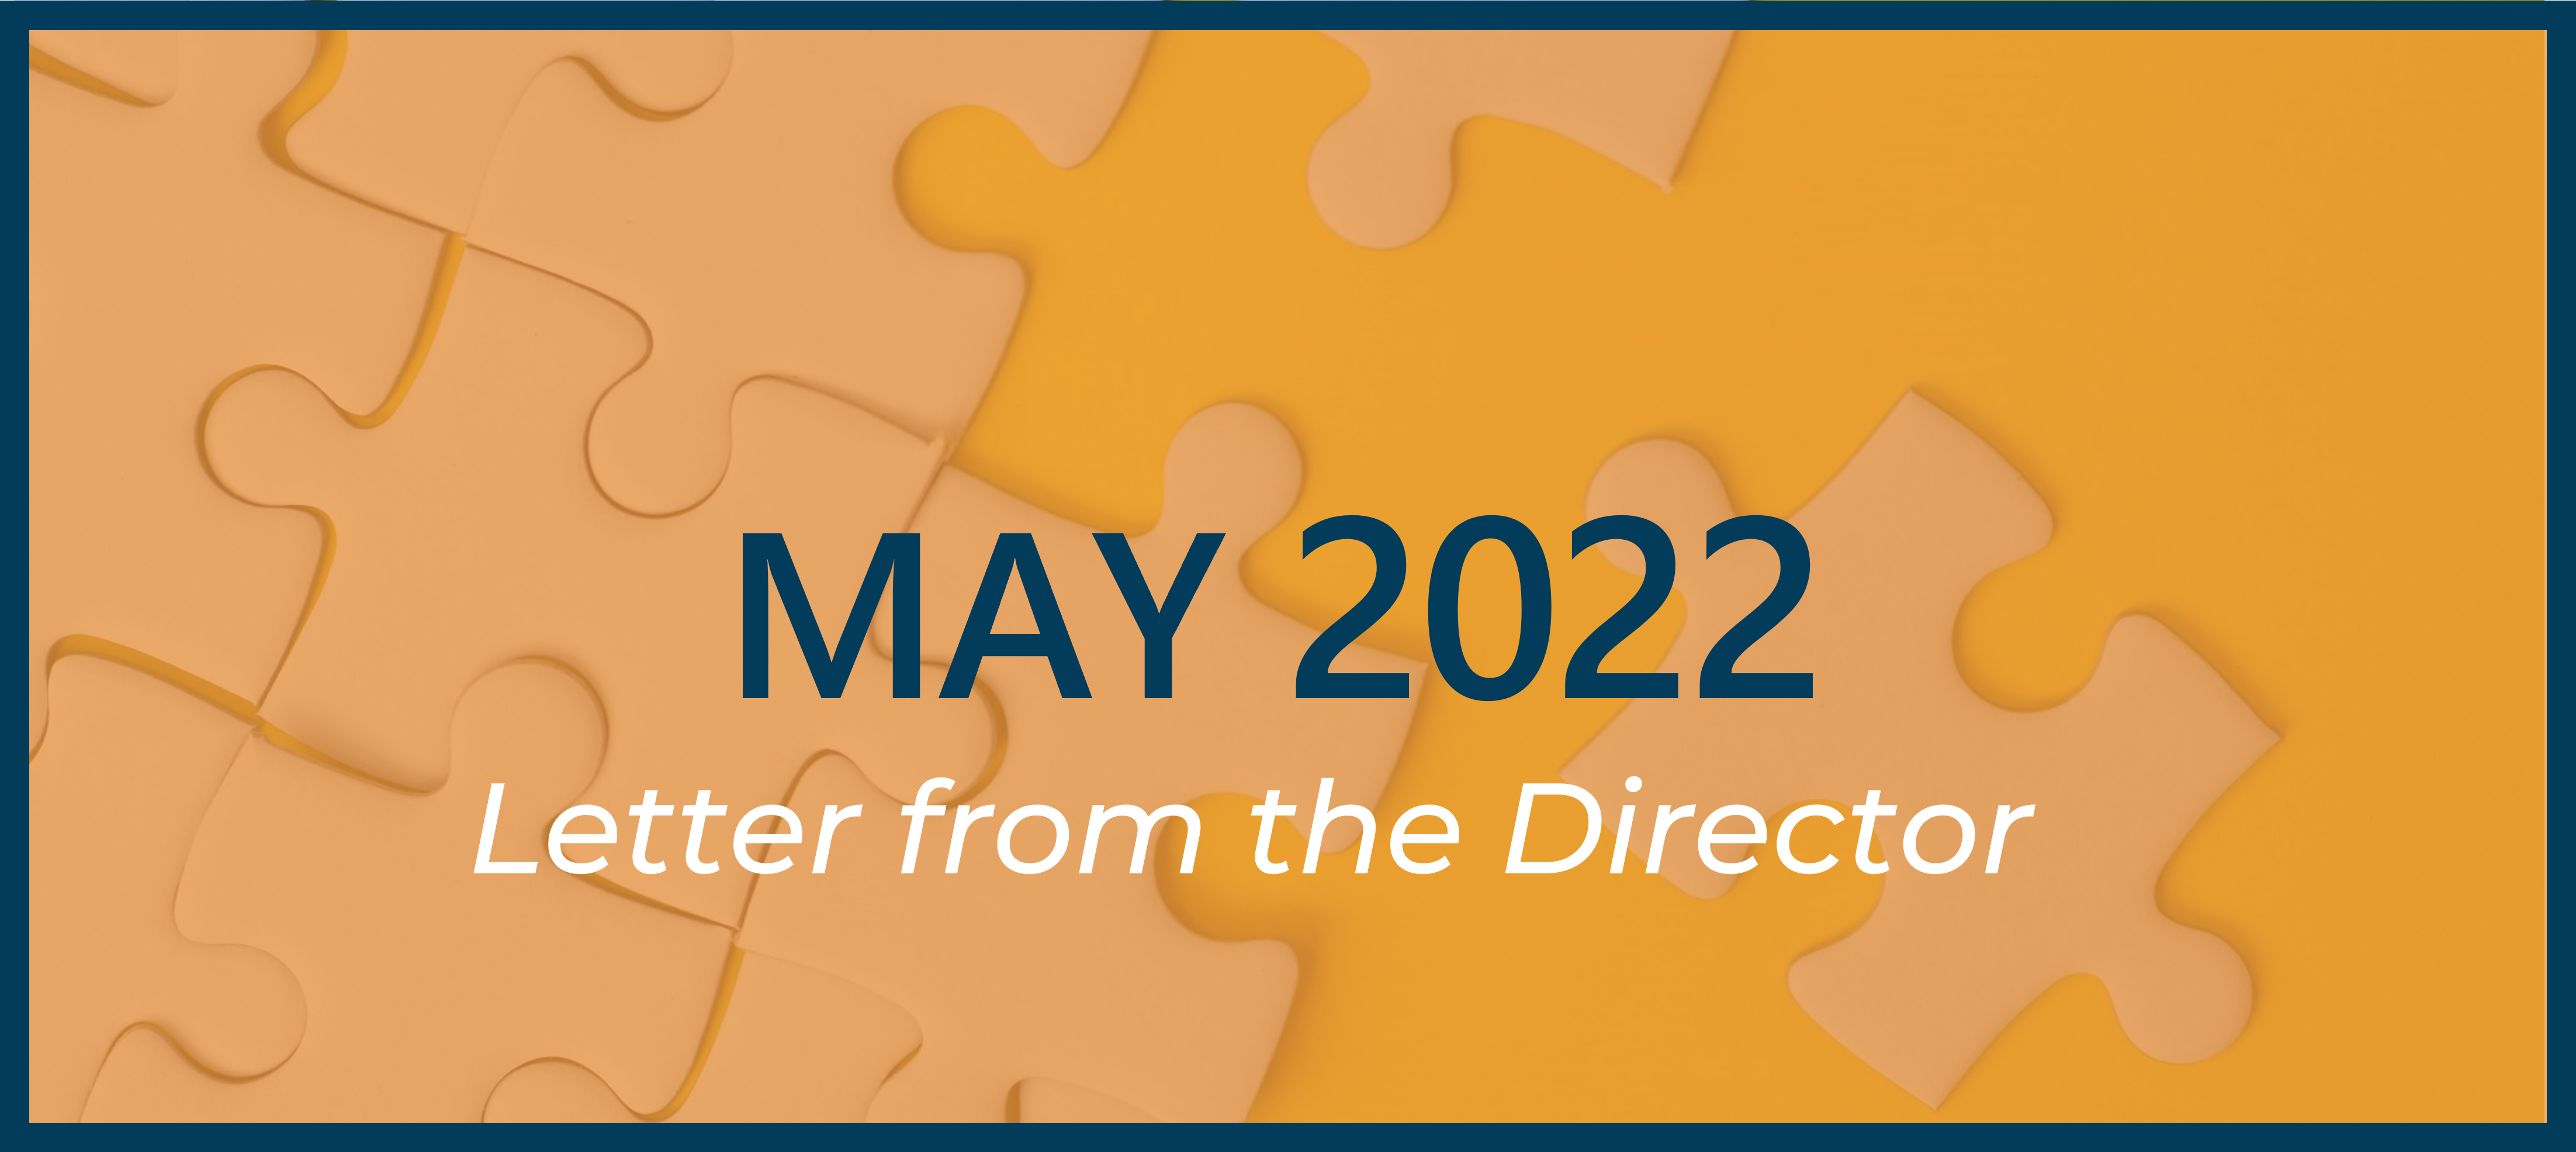 May 2022 Letter from the Director